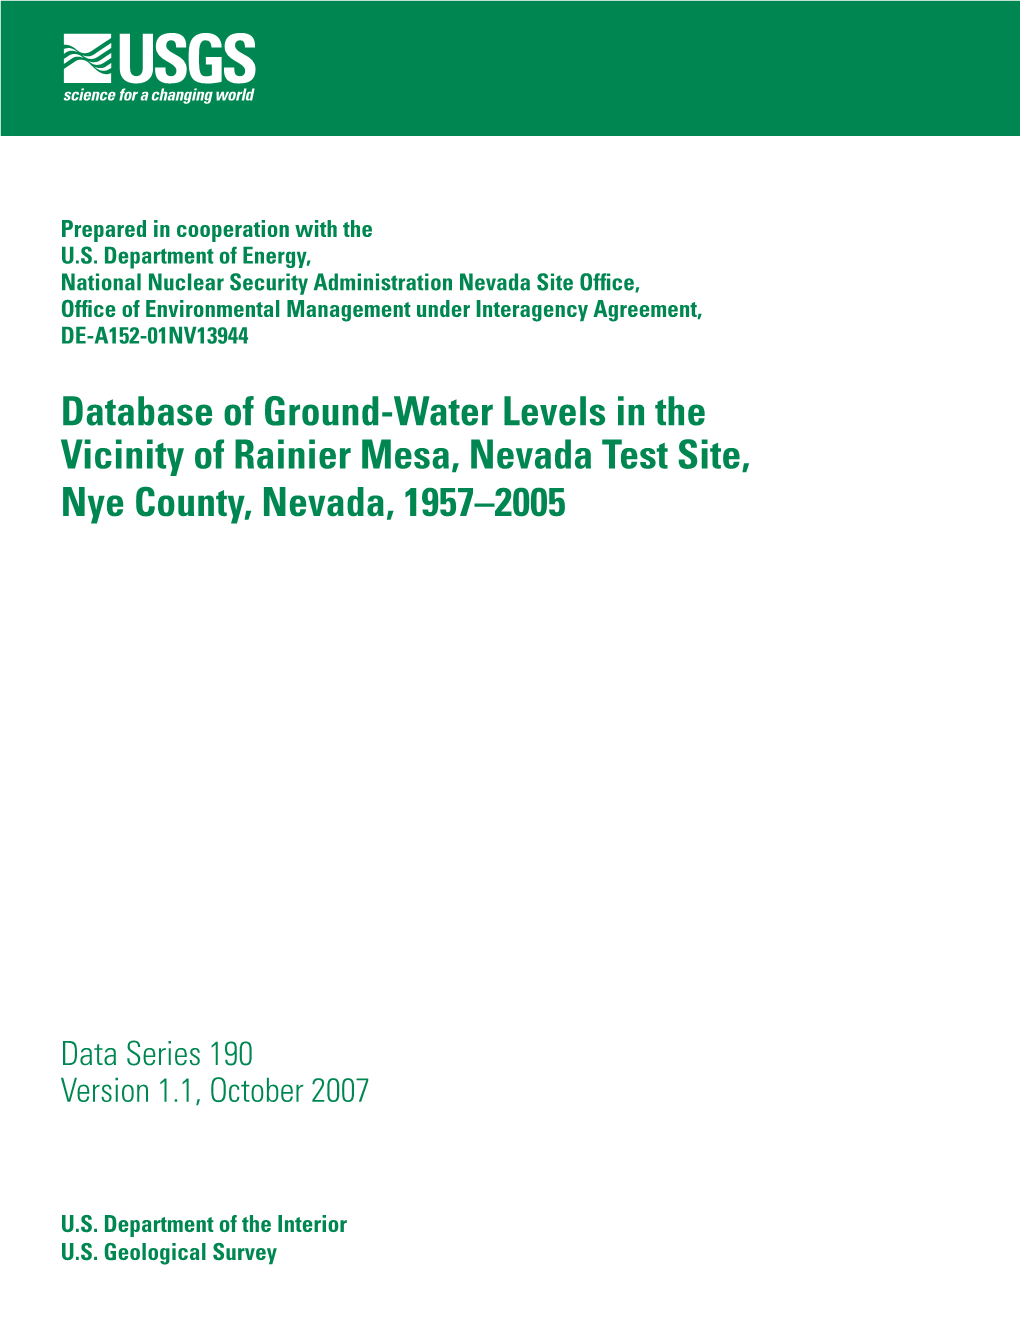 Database of Ground-Water Levels in the Vicinity of Rainier Mesa, Nevada Test Site, Nye County, Nevada, 1957–2005